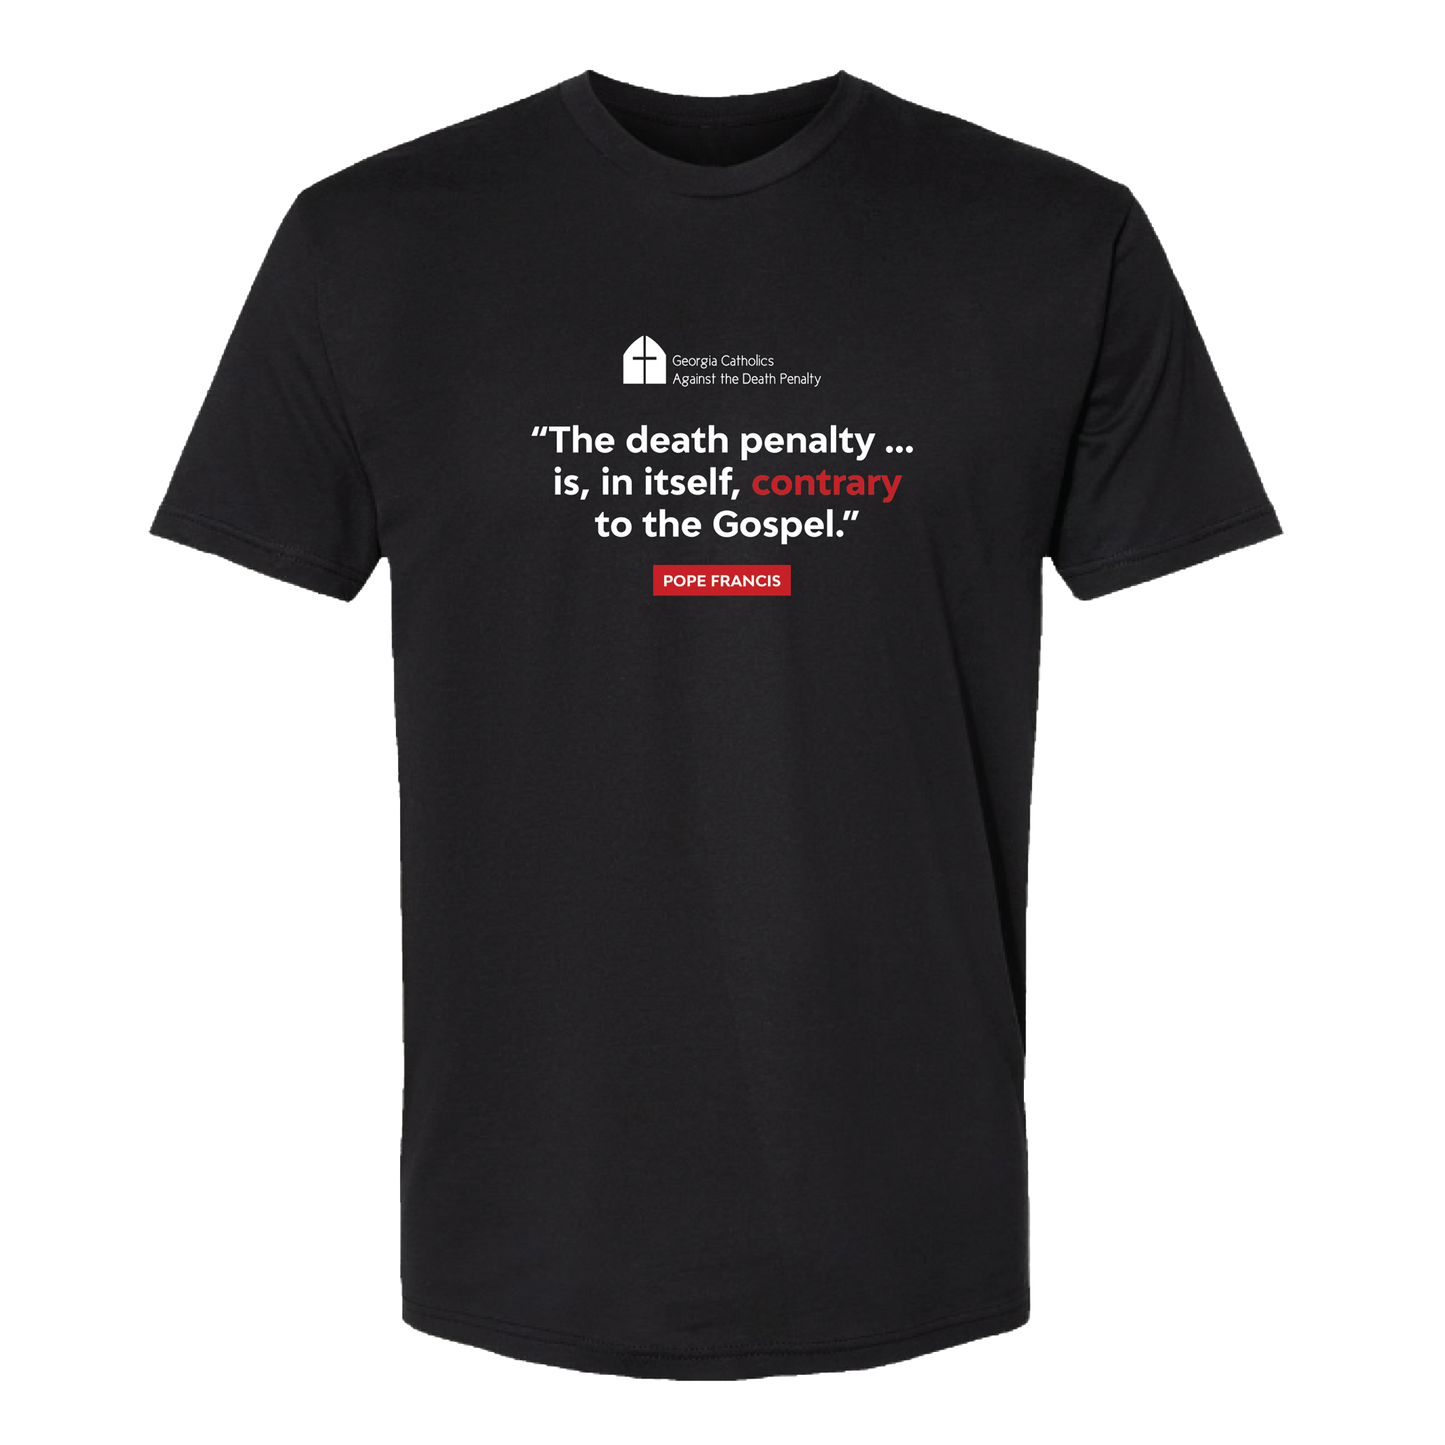 GACADP- Pope Francis Quote T-shirt